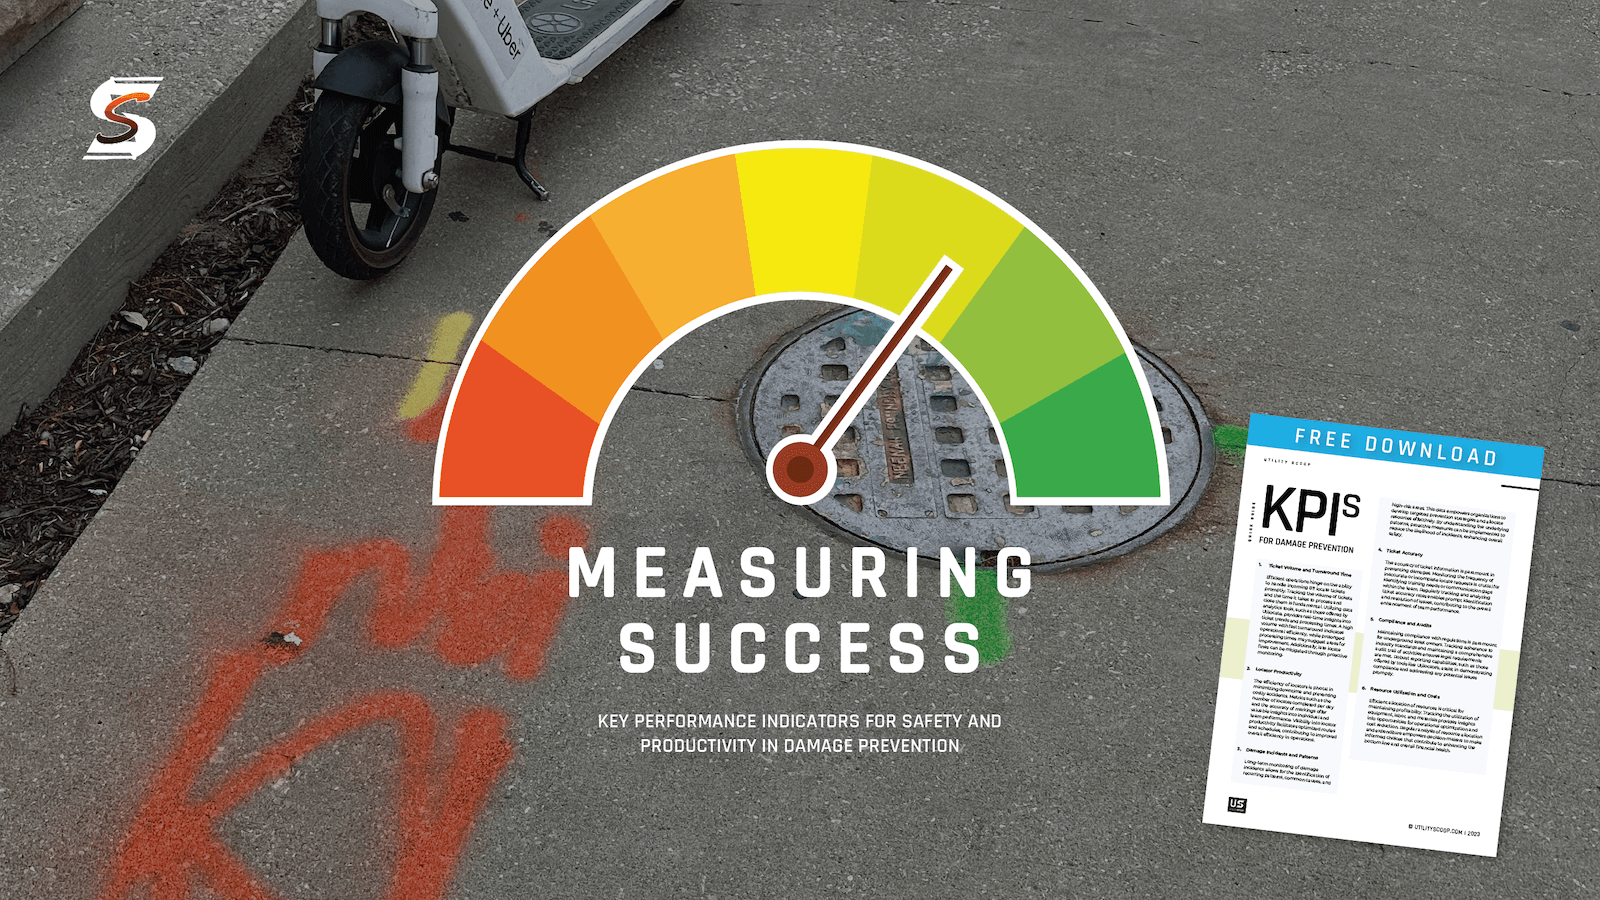 Featured image for “MEASURING SUCCESS IN DAMAGE PREVENTION”